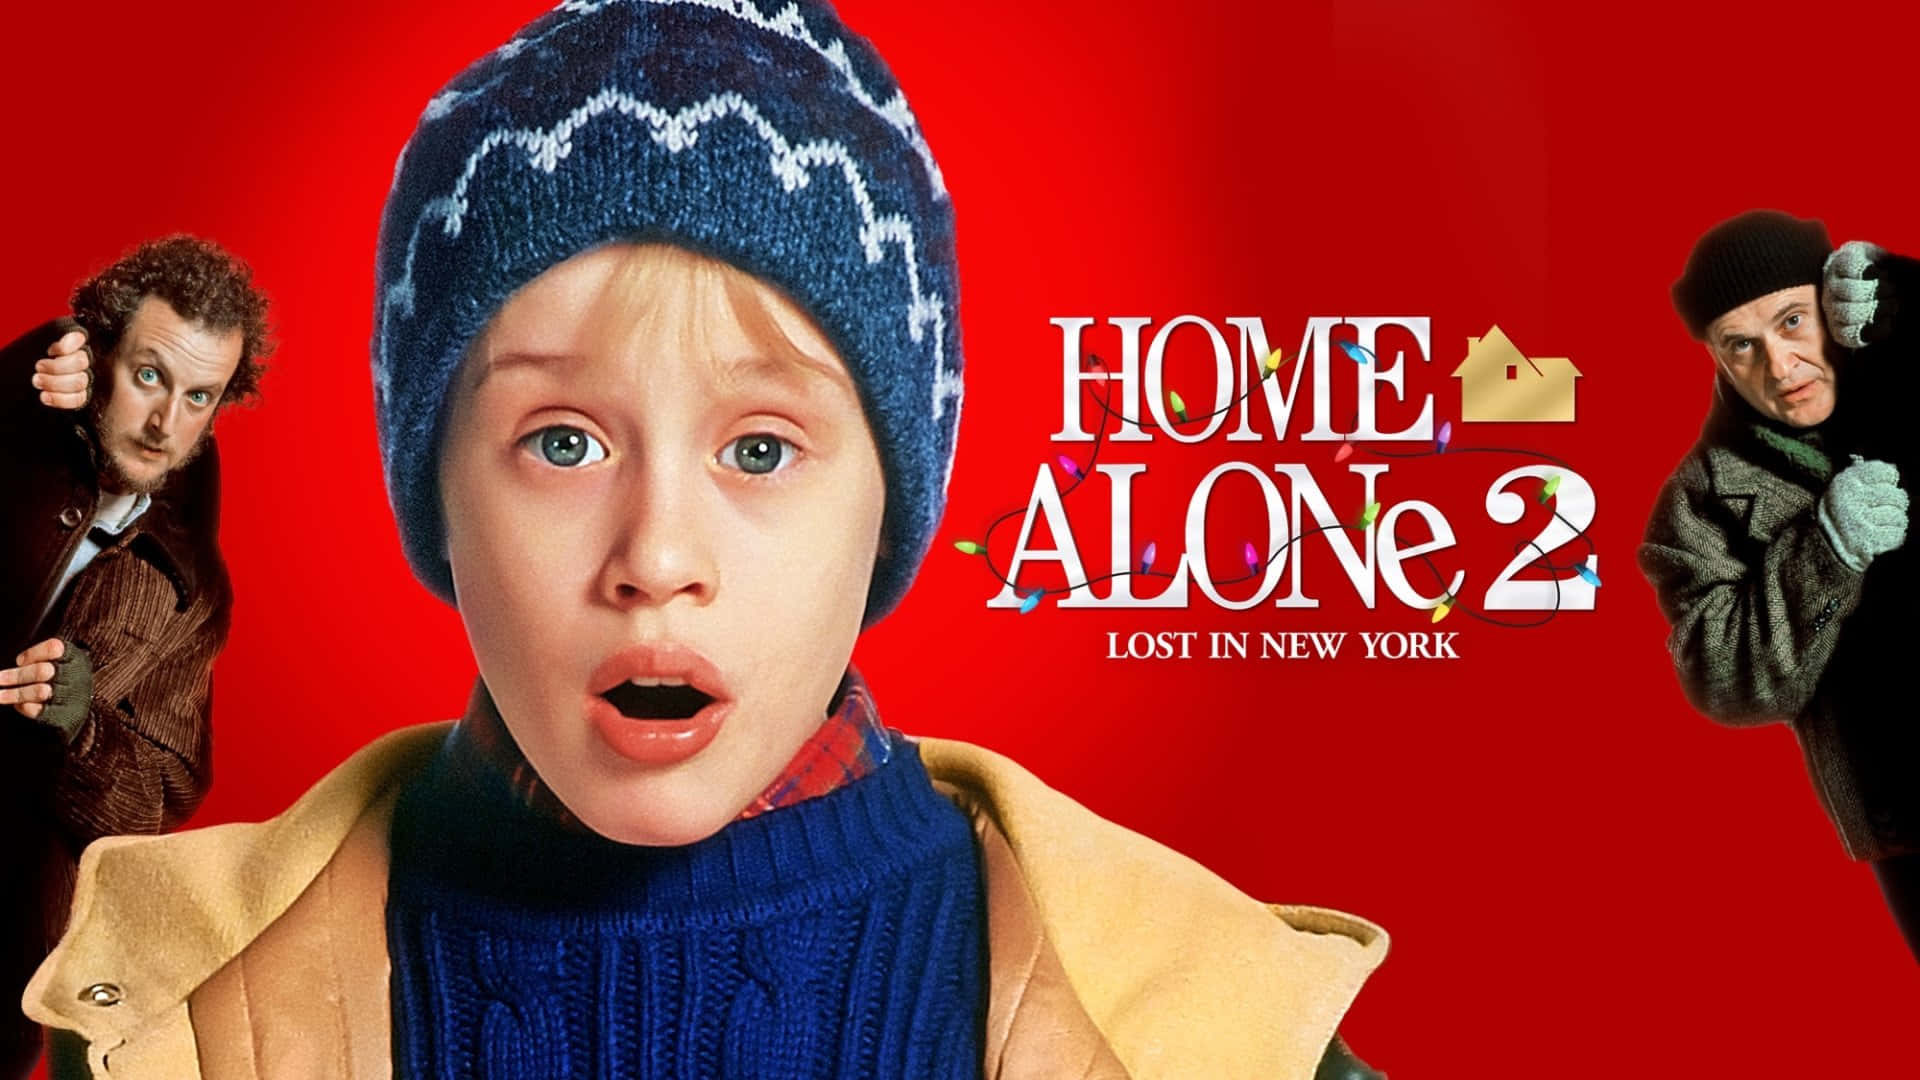 Zoom into a private home and experience the Christmas Holiday season like you're in Home Alone.